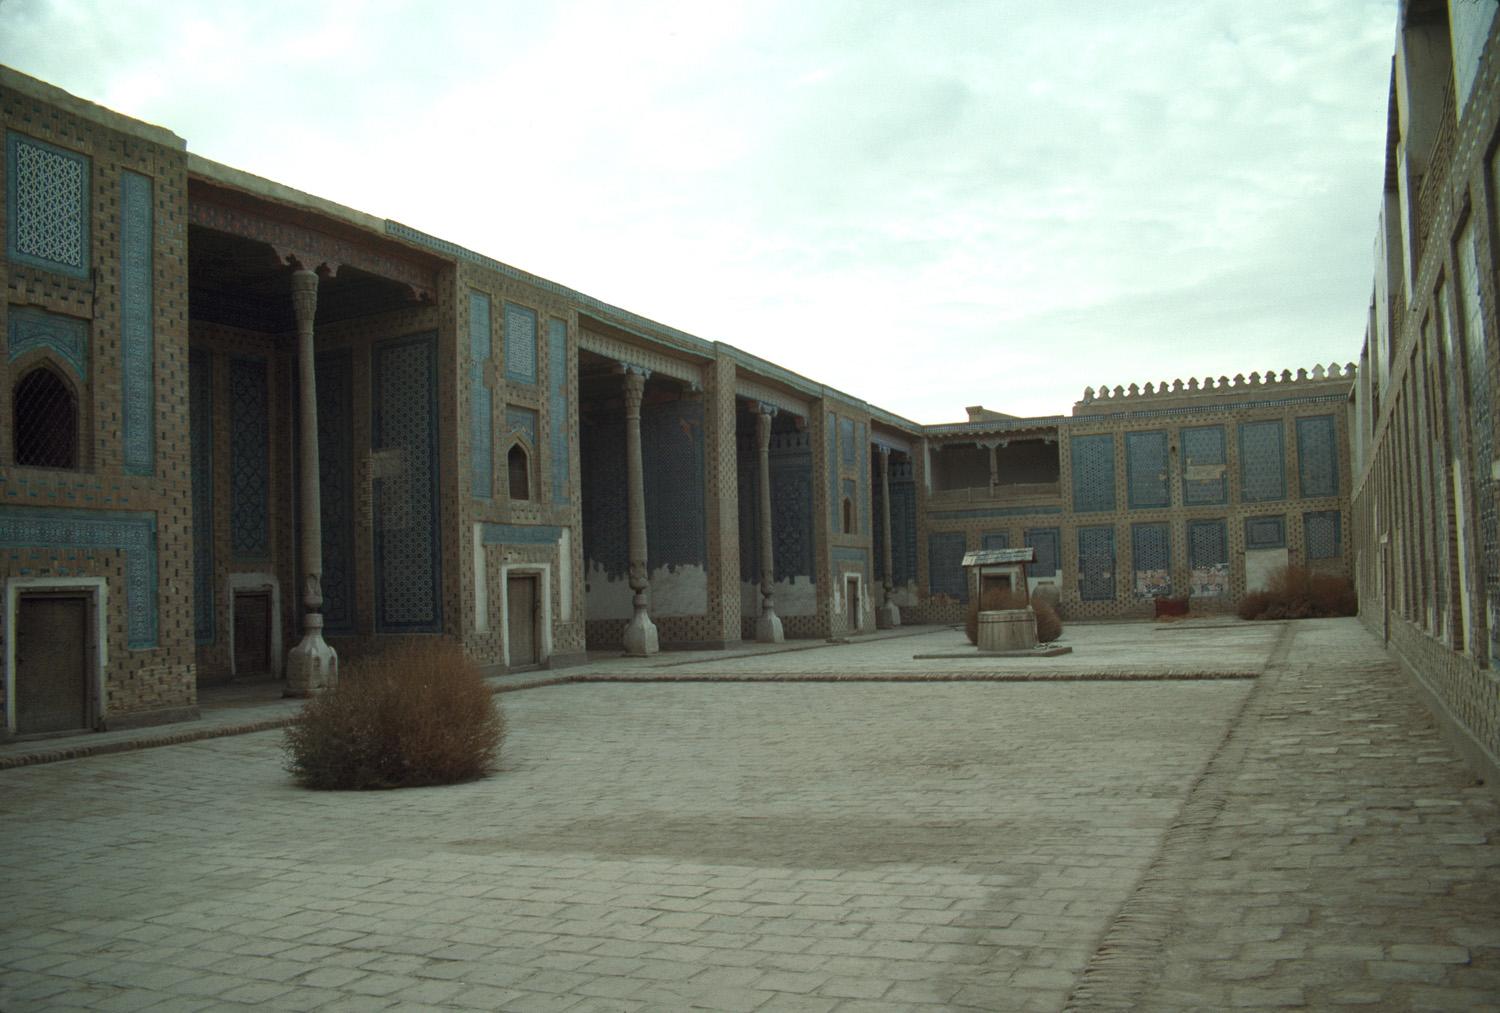 Exterior general view of courtyard